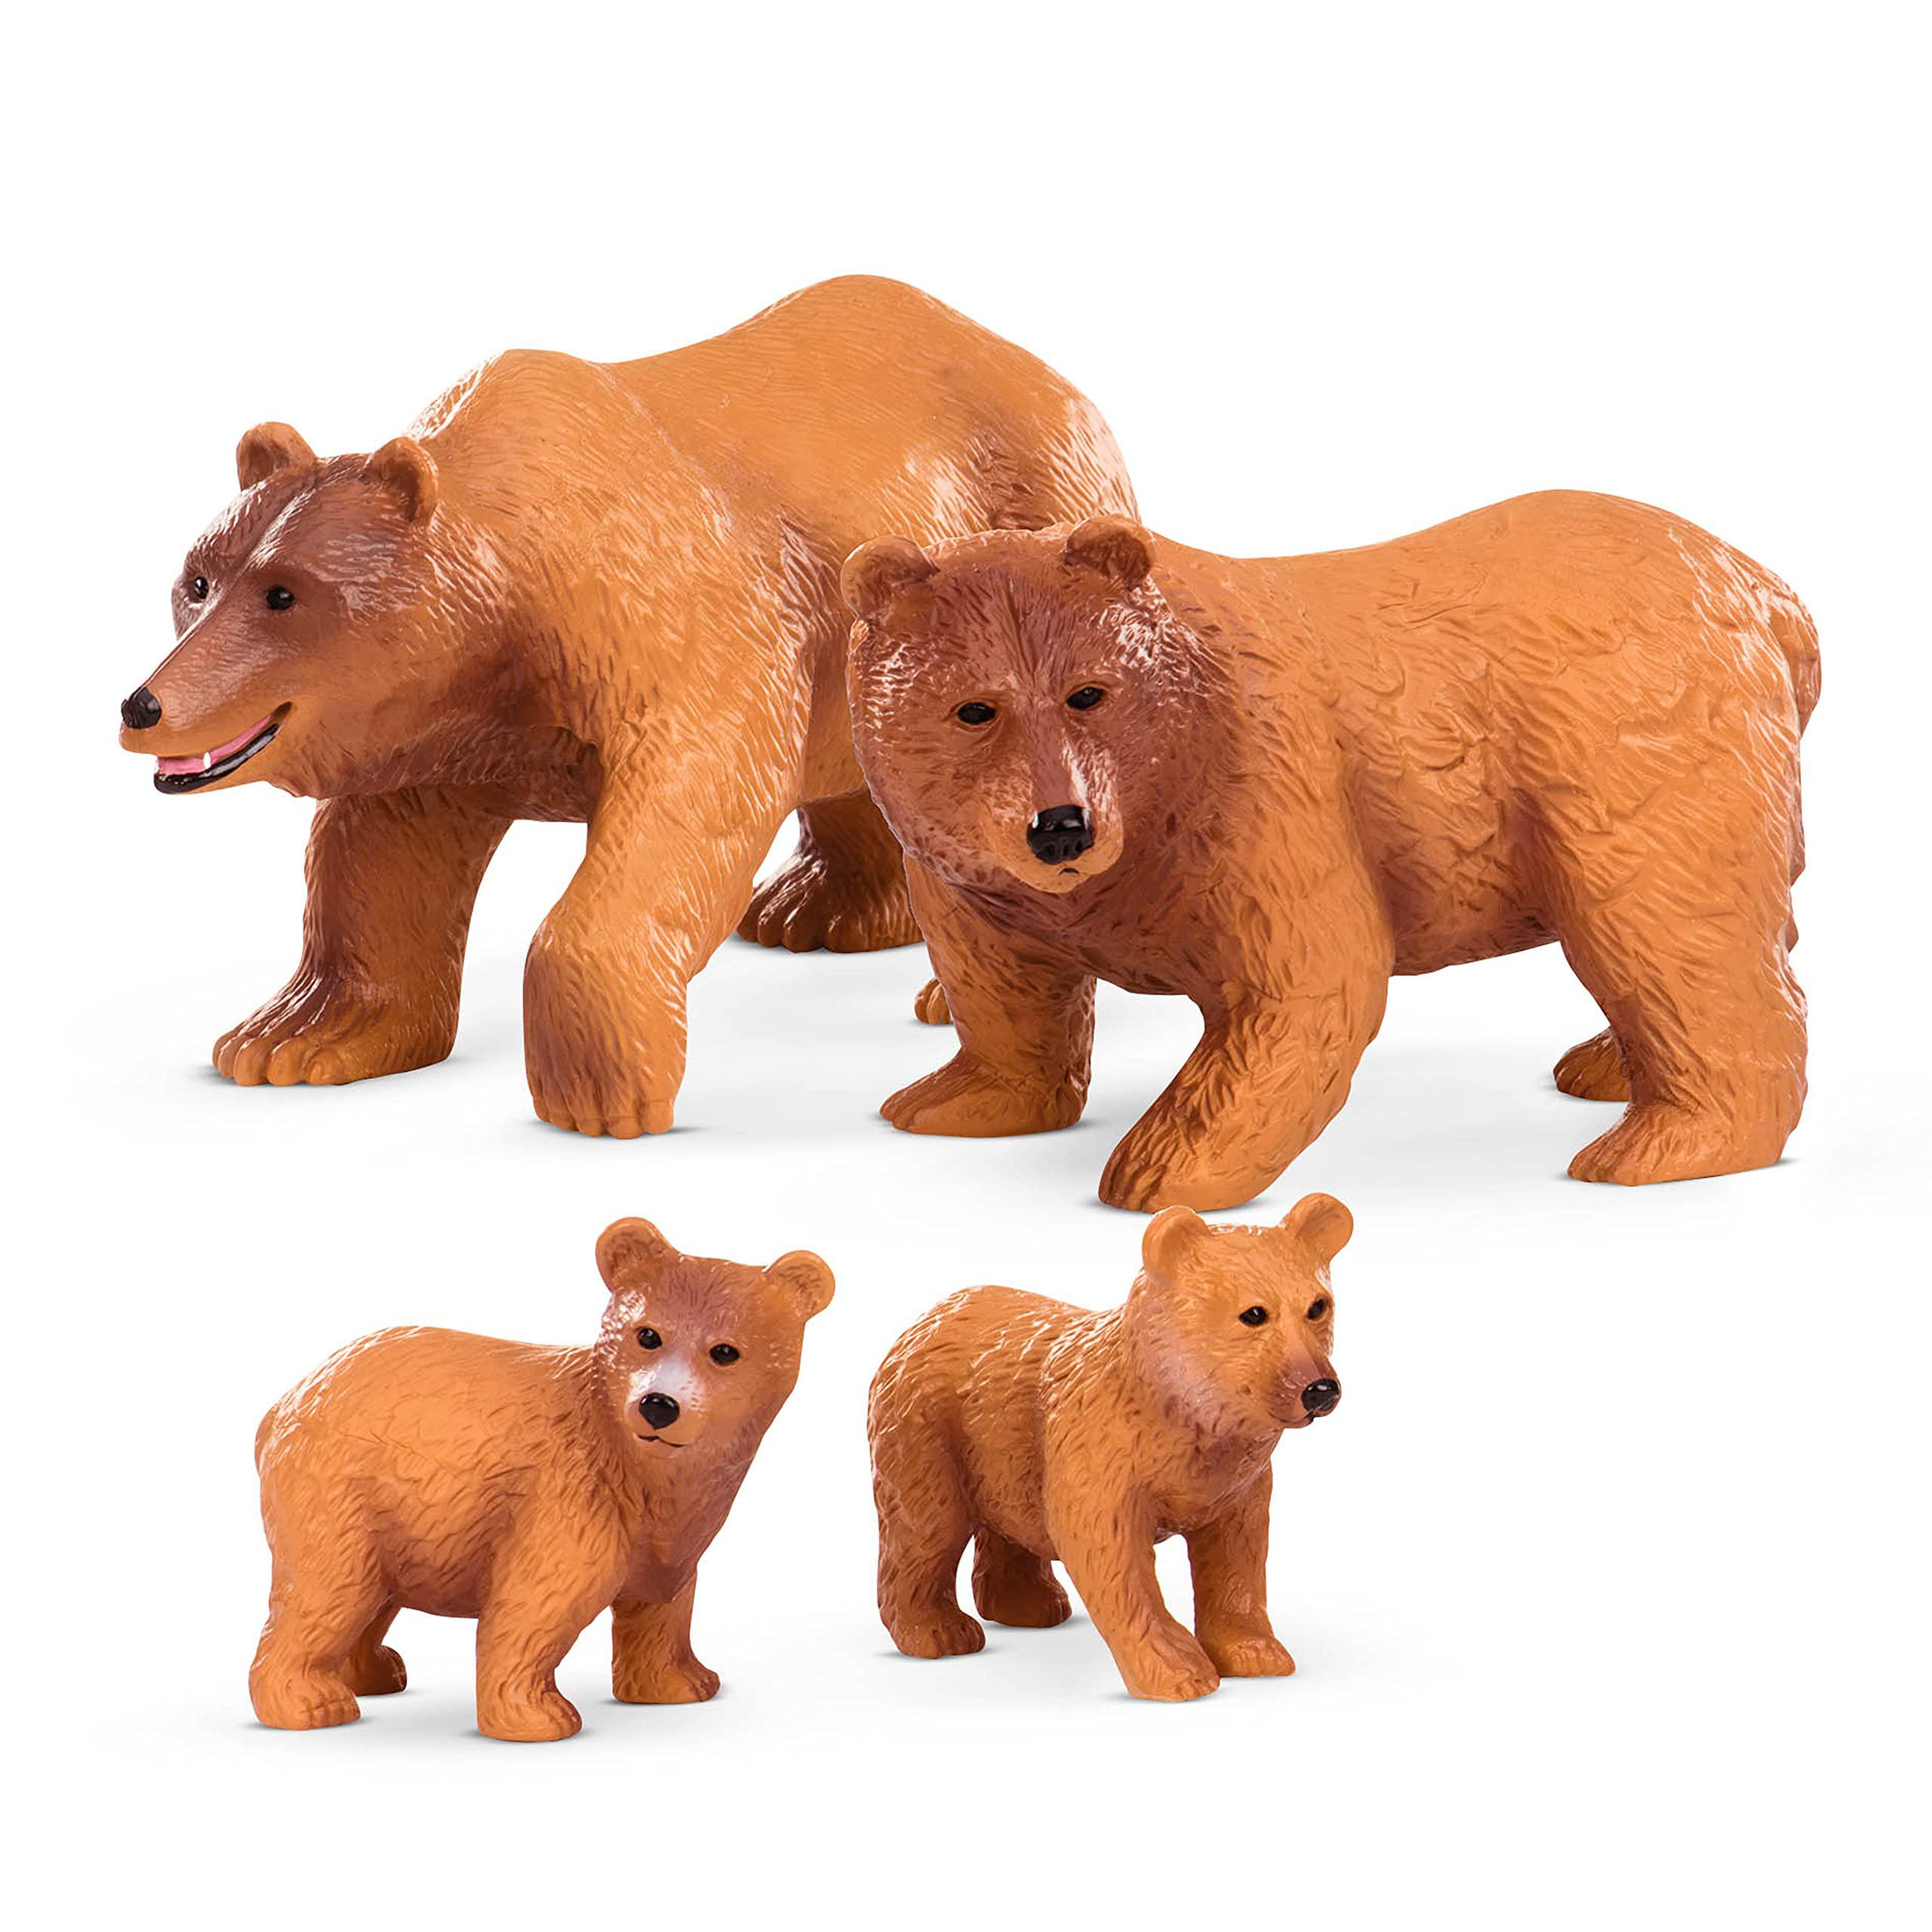 terra by battat b brown bear family - small brown bear animal figures for kids 3-years-old & up (4 pc)